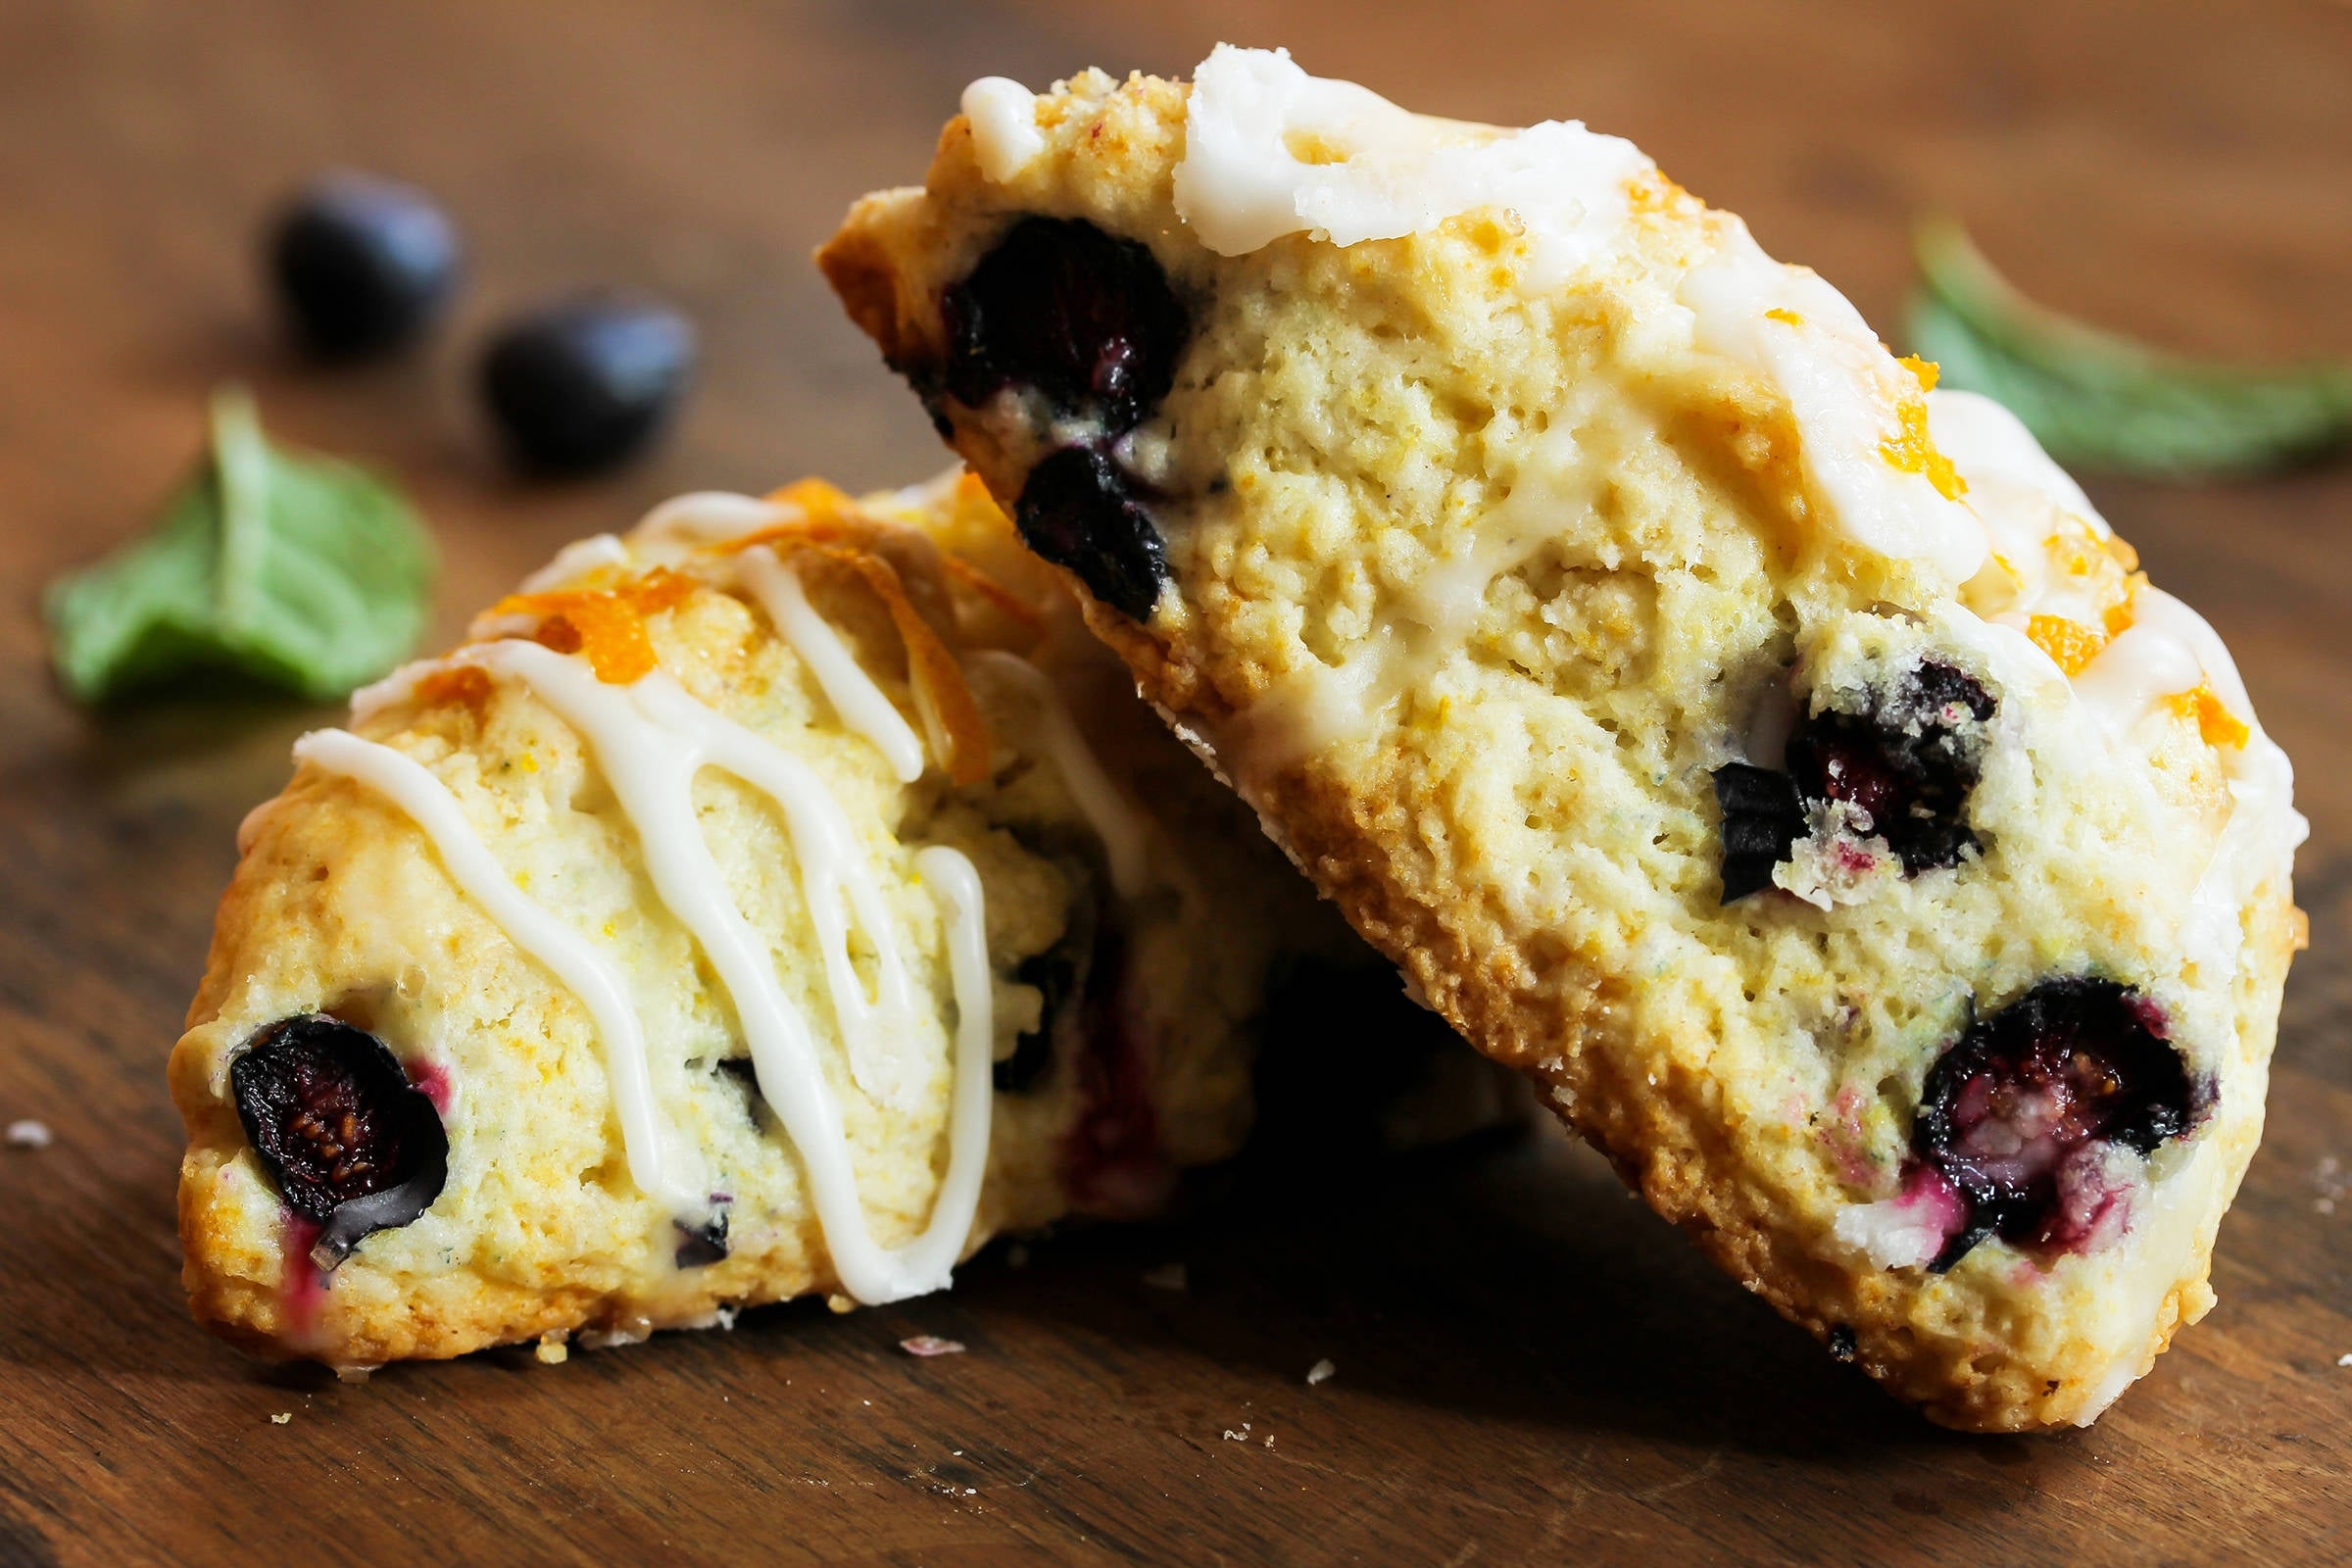 Blueberry and lemon scones drizzled with icing.